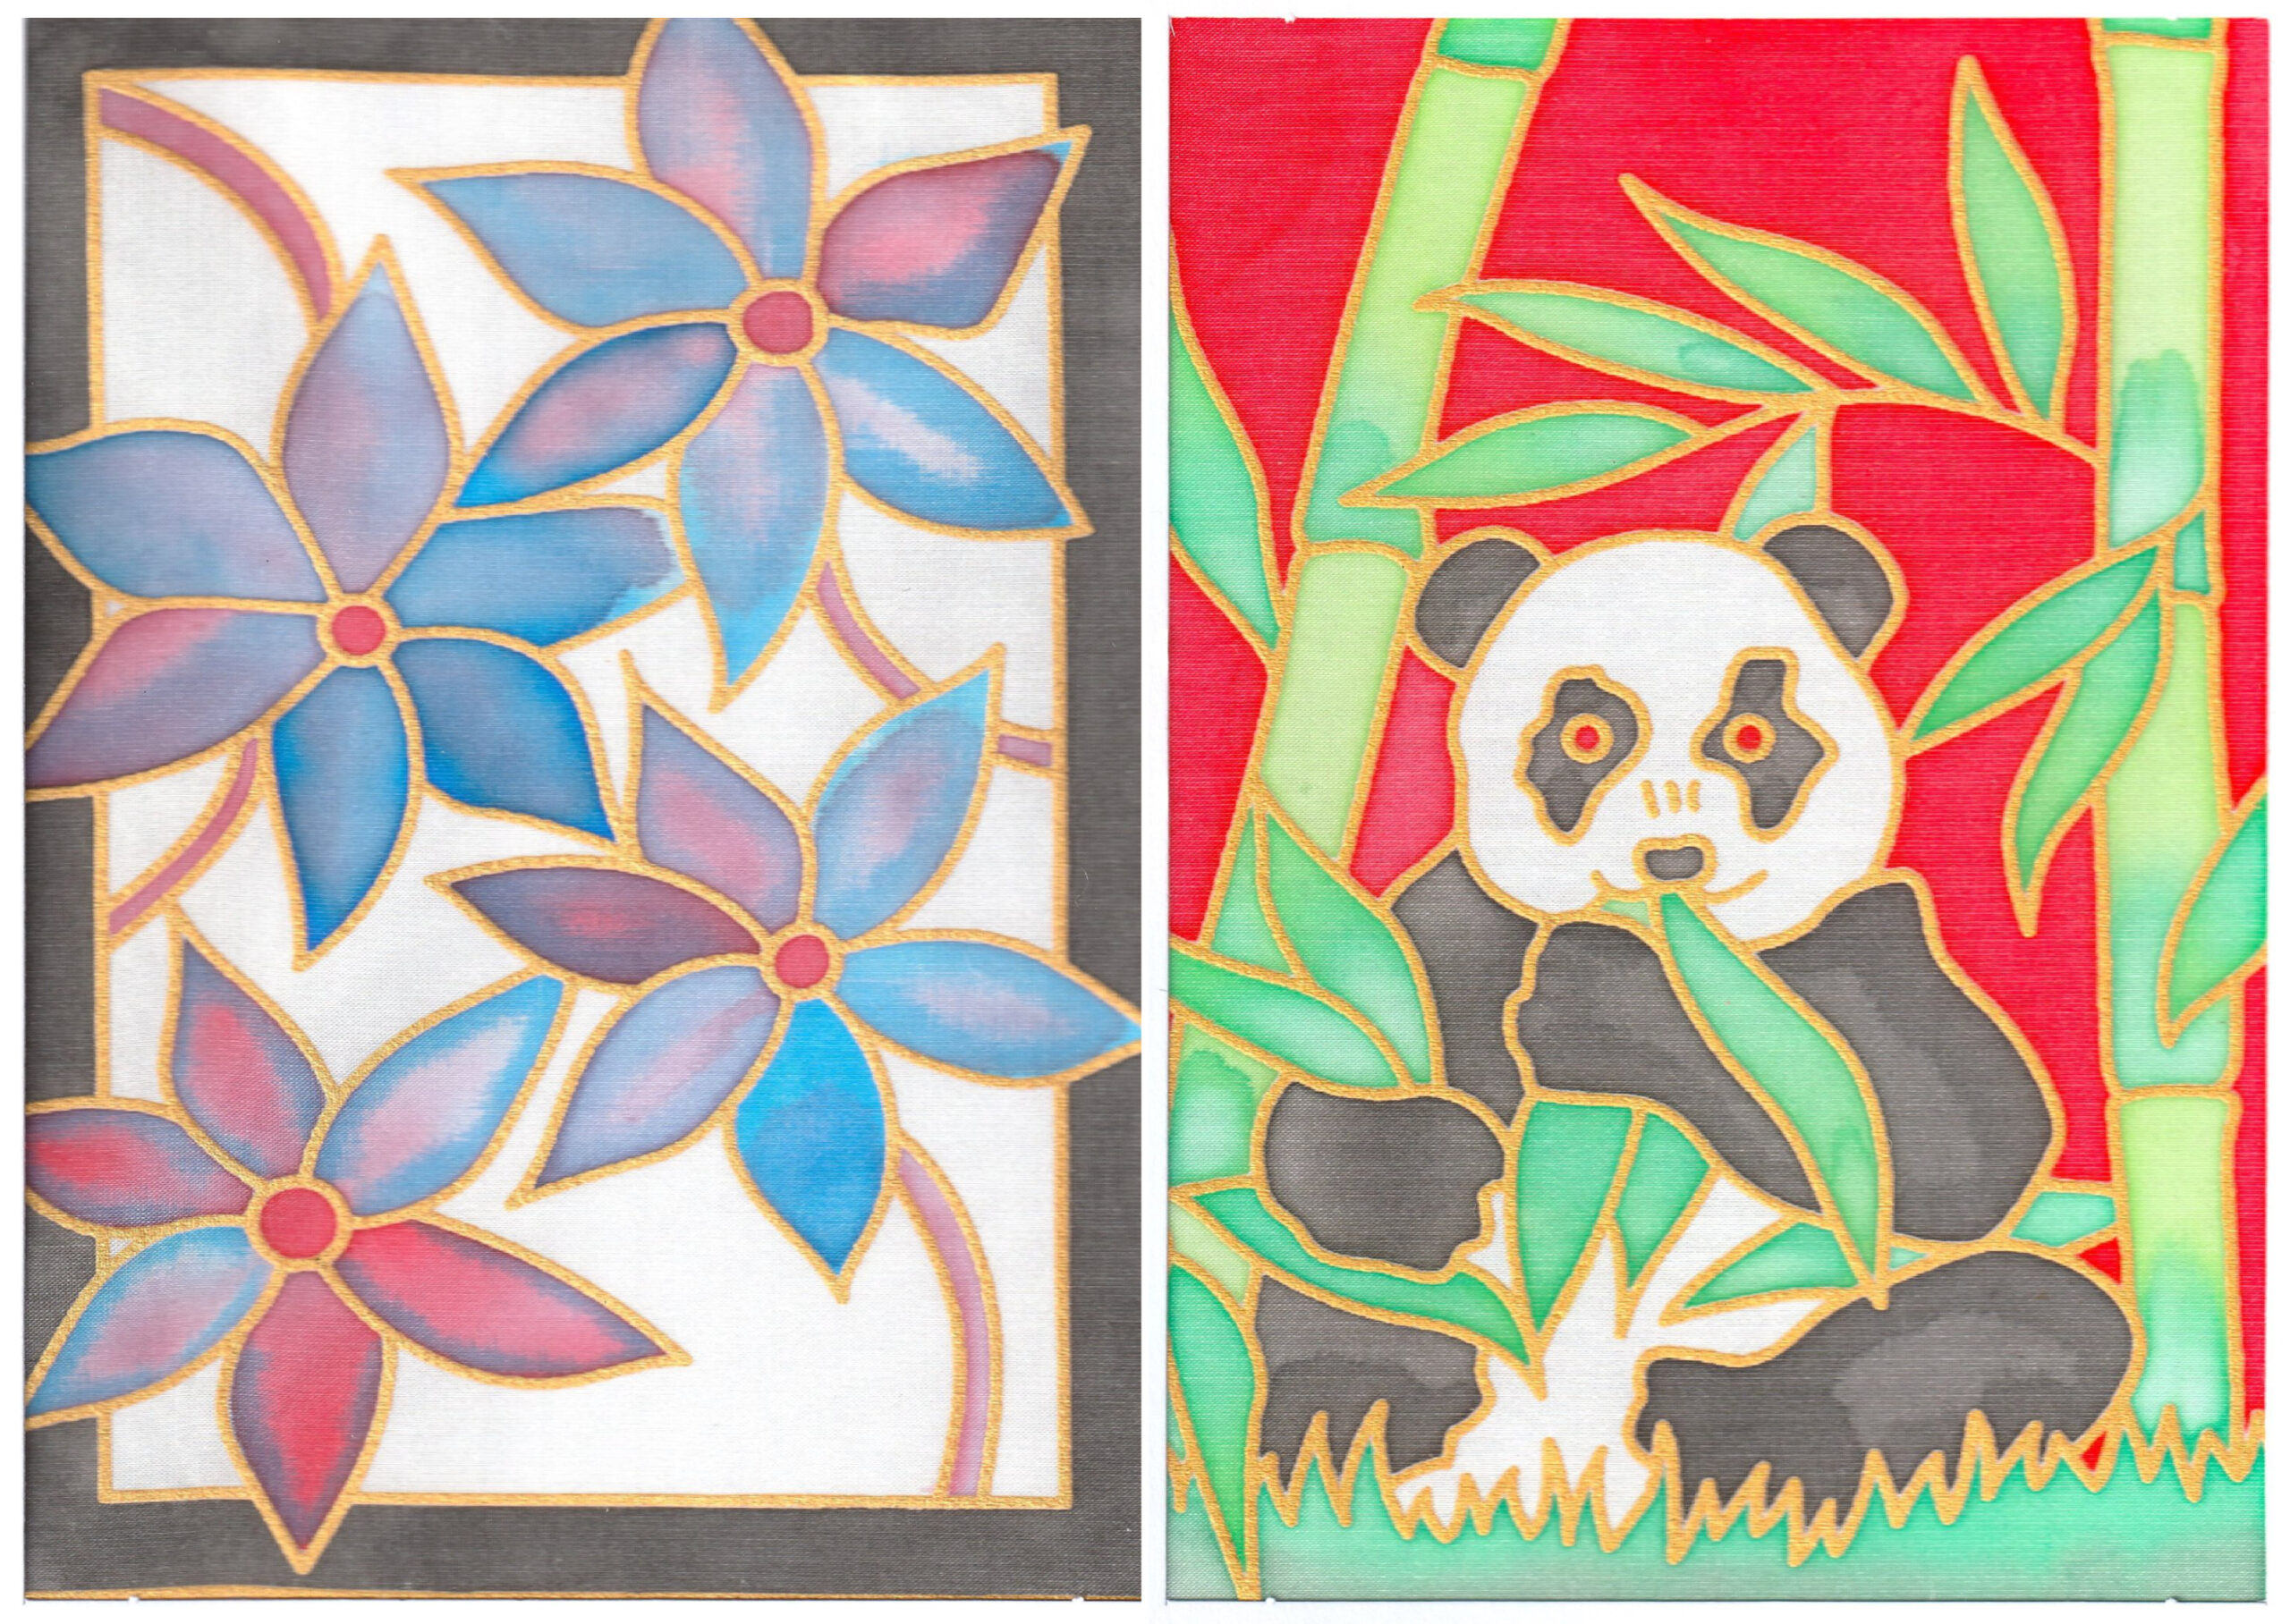 Paintings from our craft packs: silk paintings of flowers and a panda